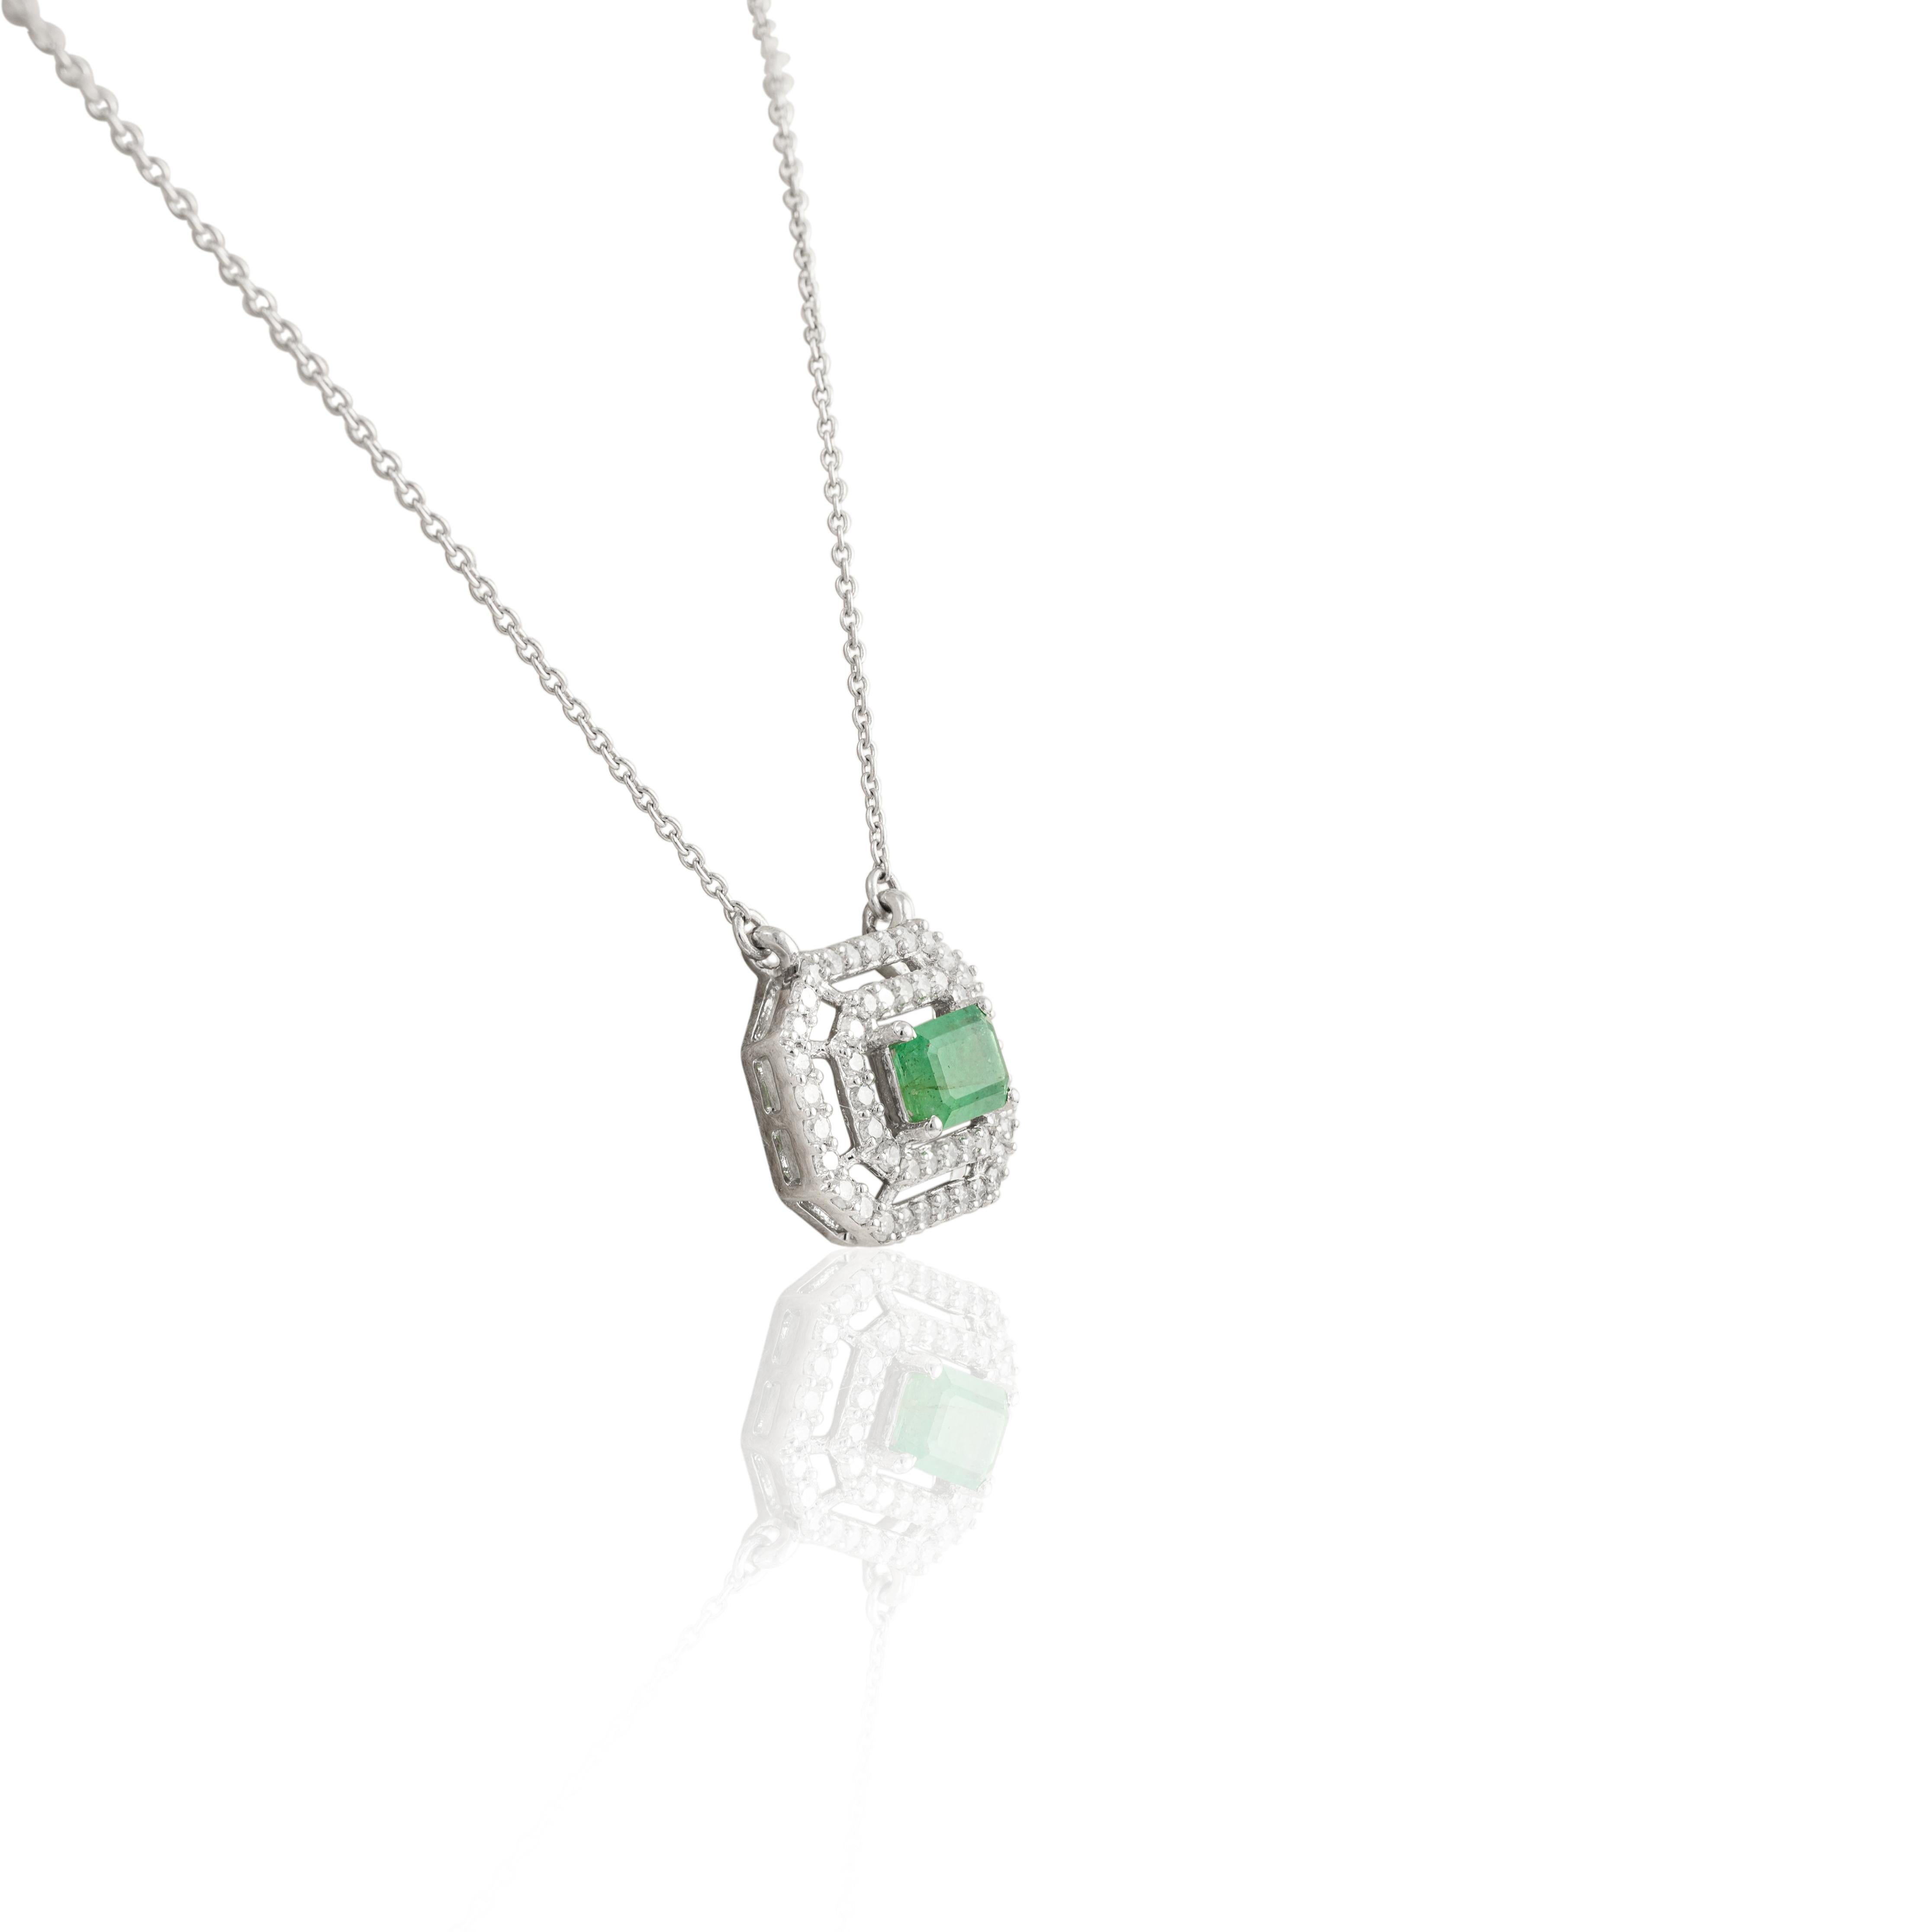 Modern Brilliant Emerald Diamond Pendant Necklace 14k Solid White Gold, Gift For Sister For Sale